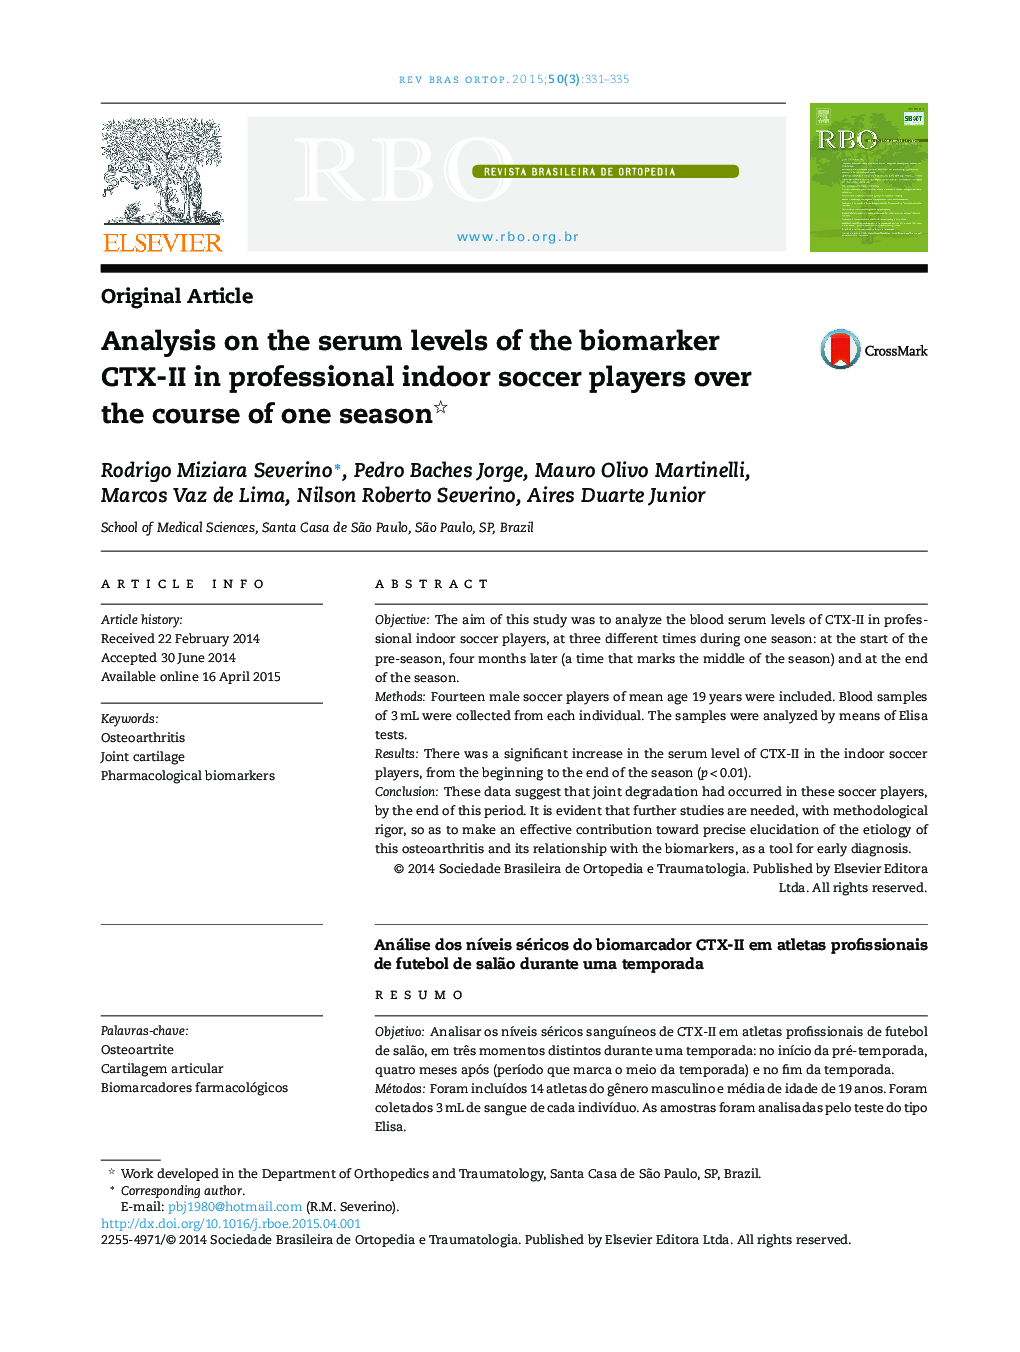 Analysis on the serum levels of the biomarker CTX-II in professional indoor soccer players over the course of one season 